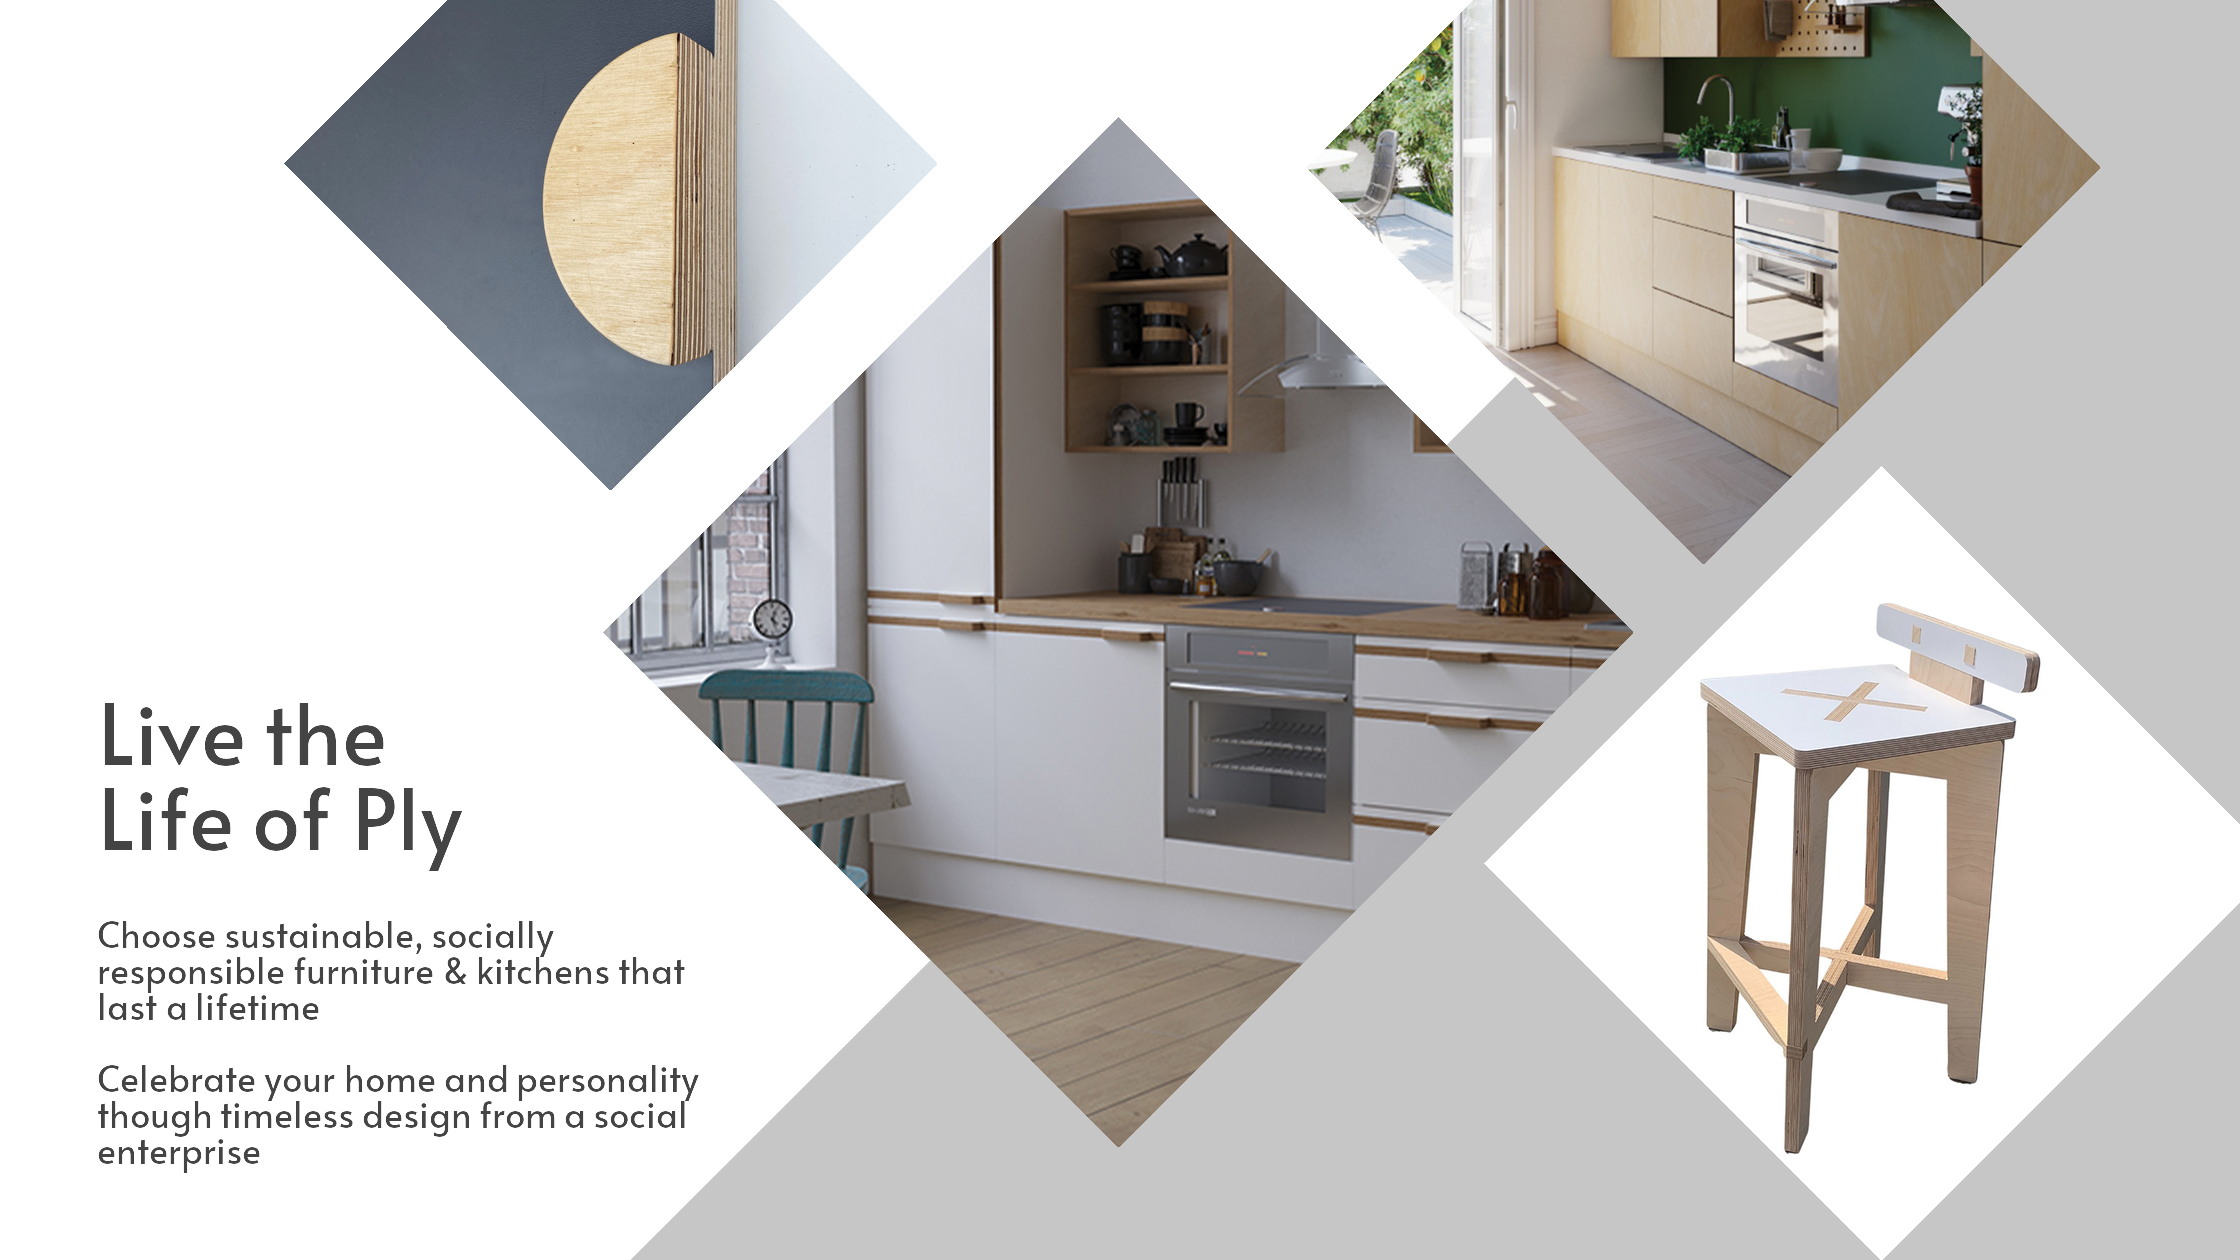 the Life of Ply offers a range of furniture and kitchens in plywood